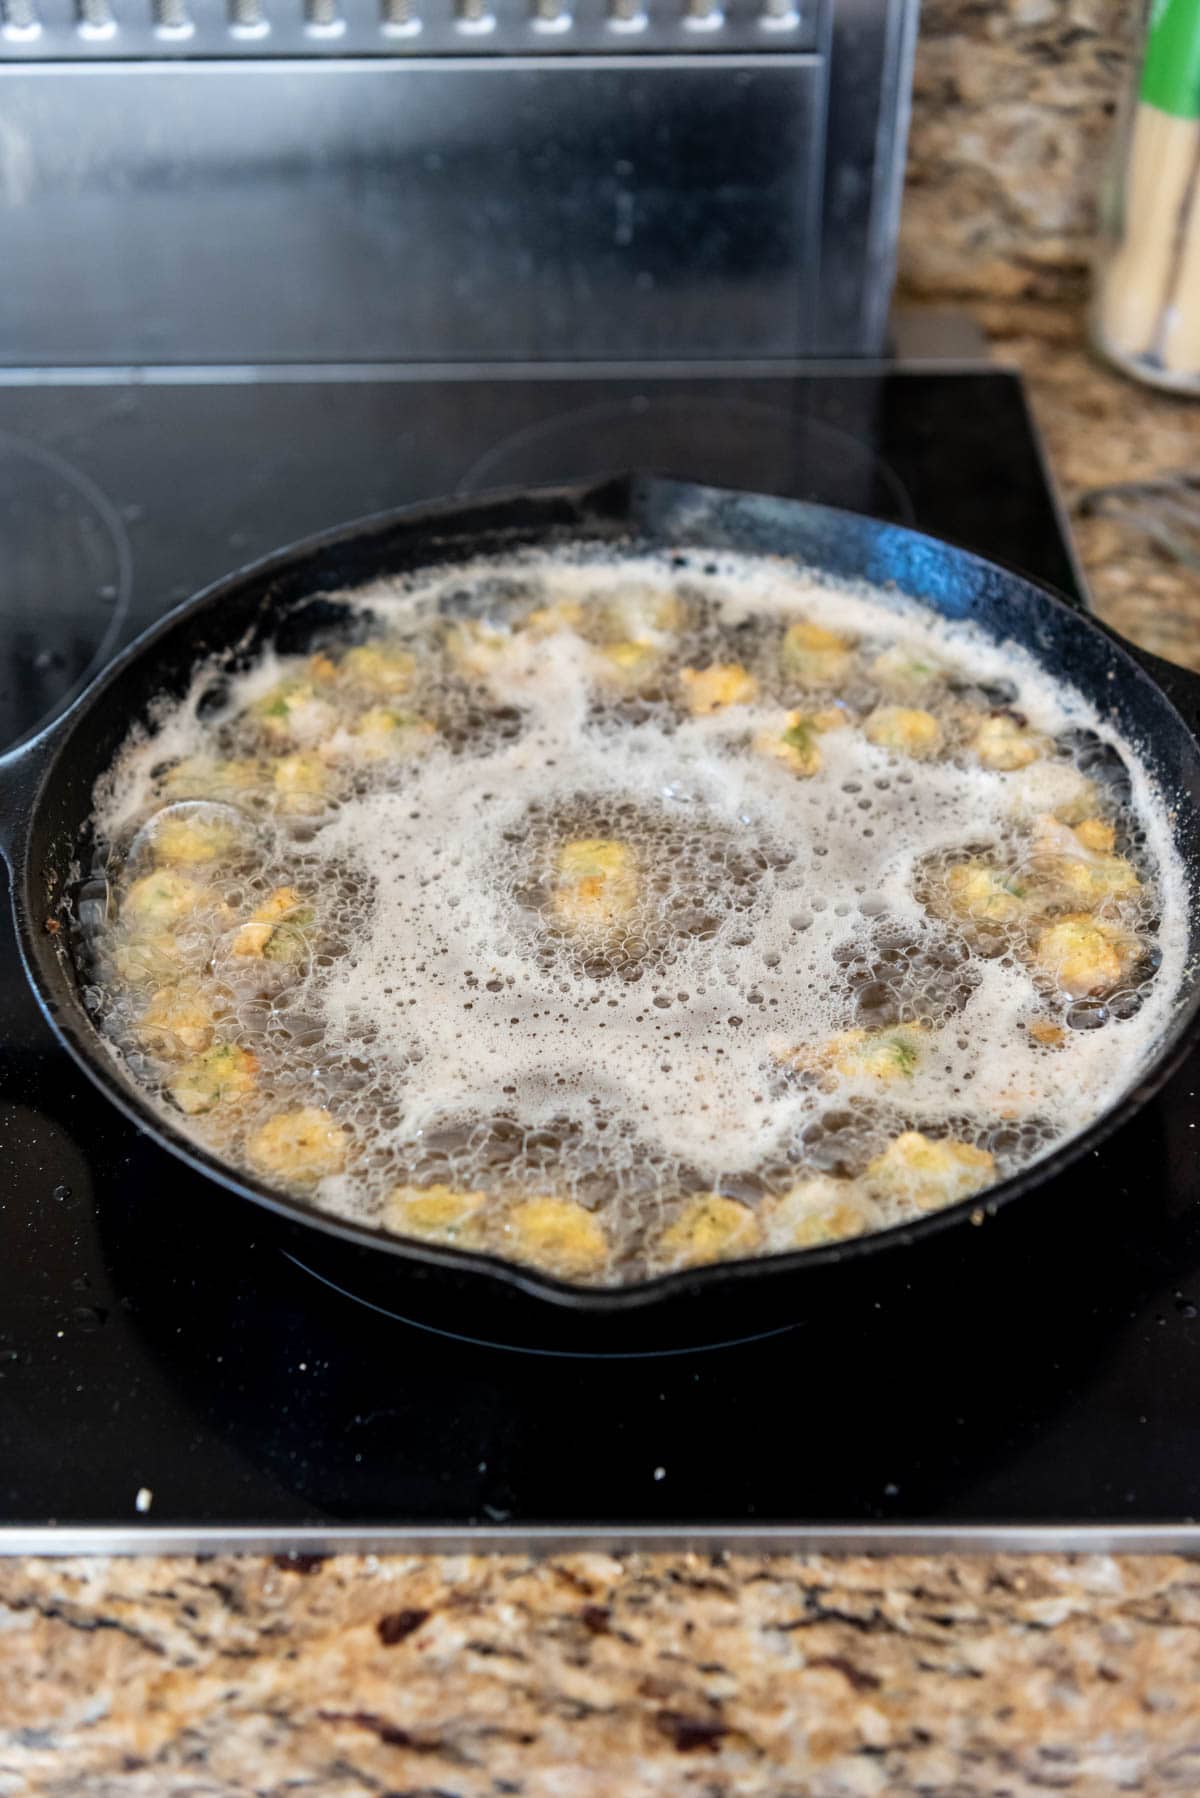 Frying okra in hot oil in a cast iron pan on the stove.